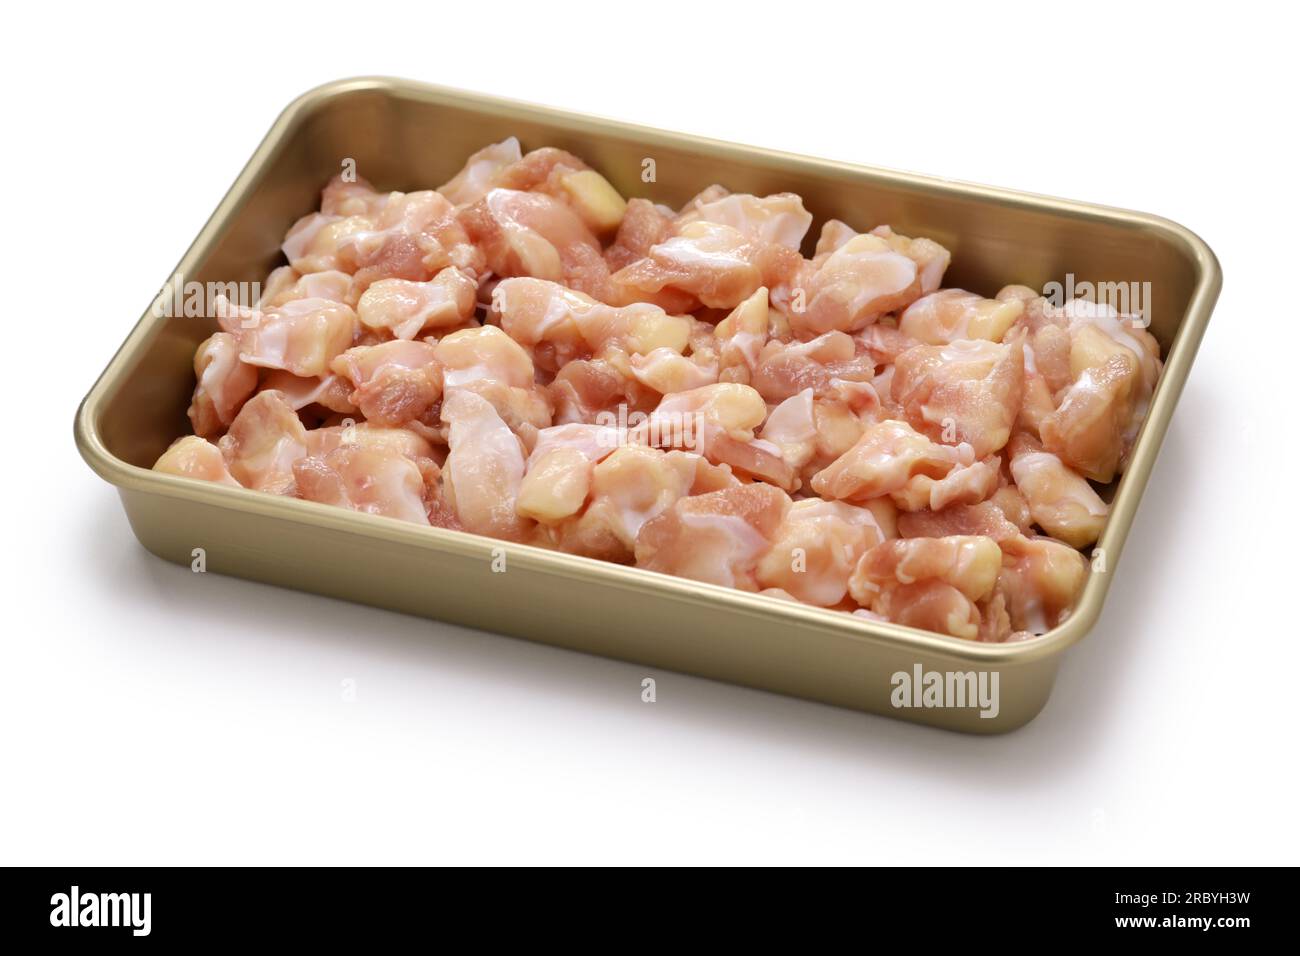 raw chicken cartilage in a tray Stock Photo